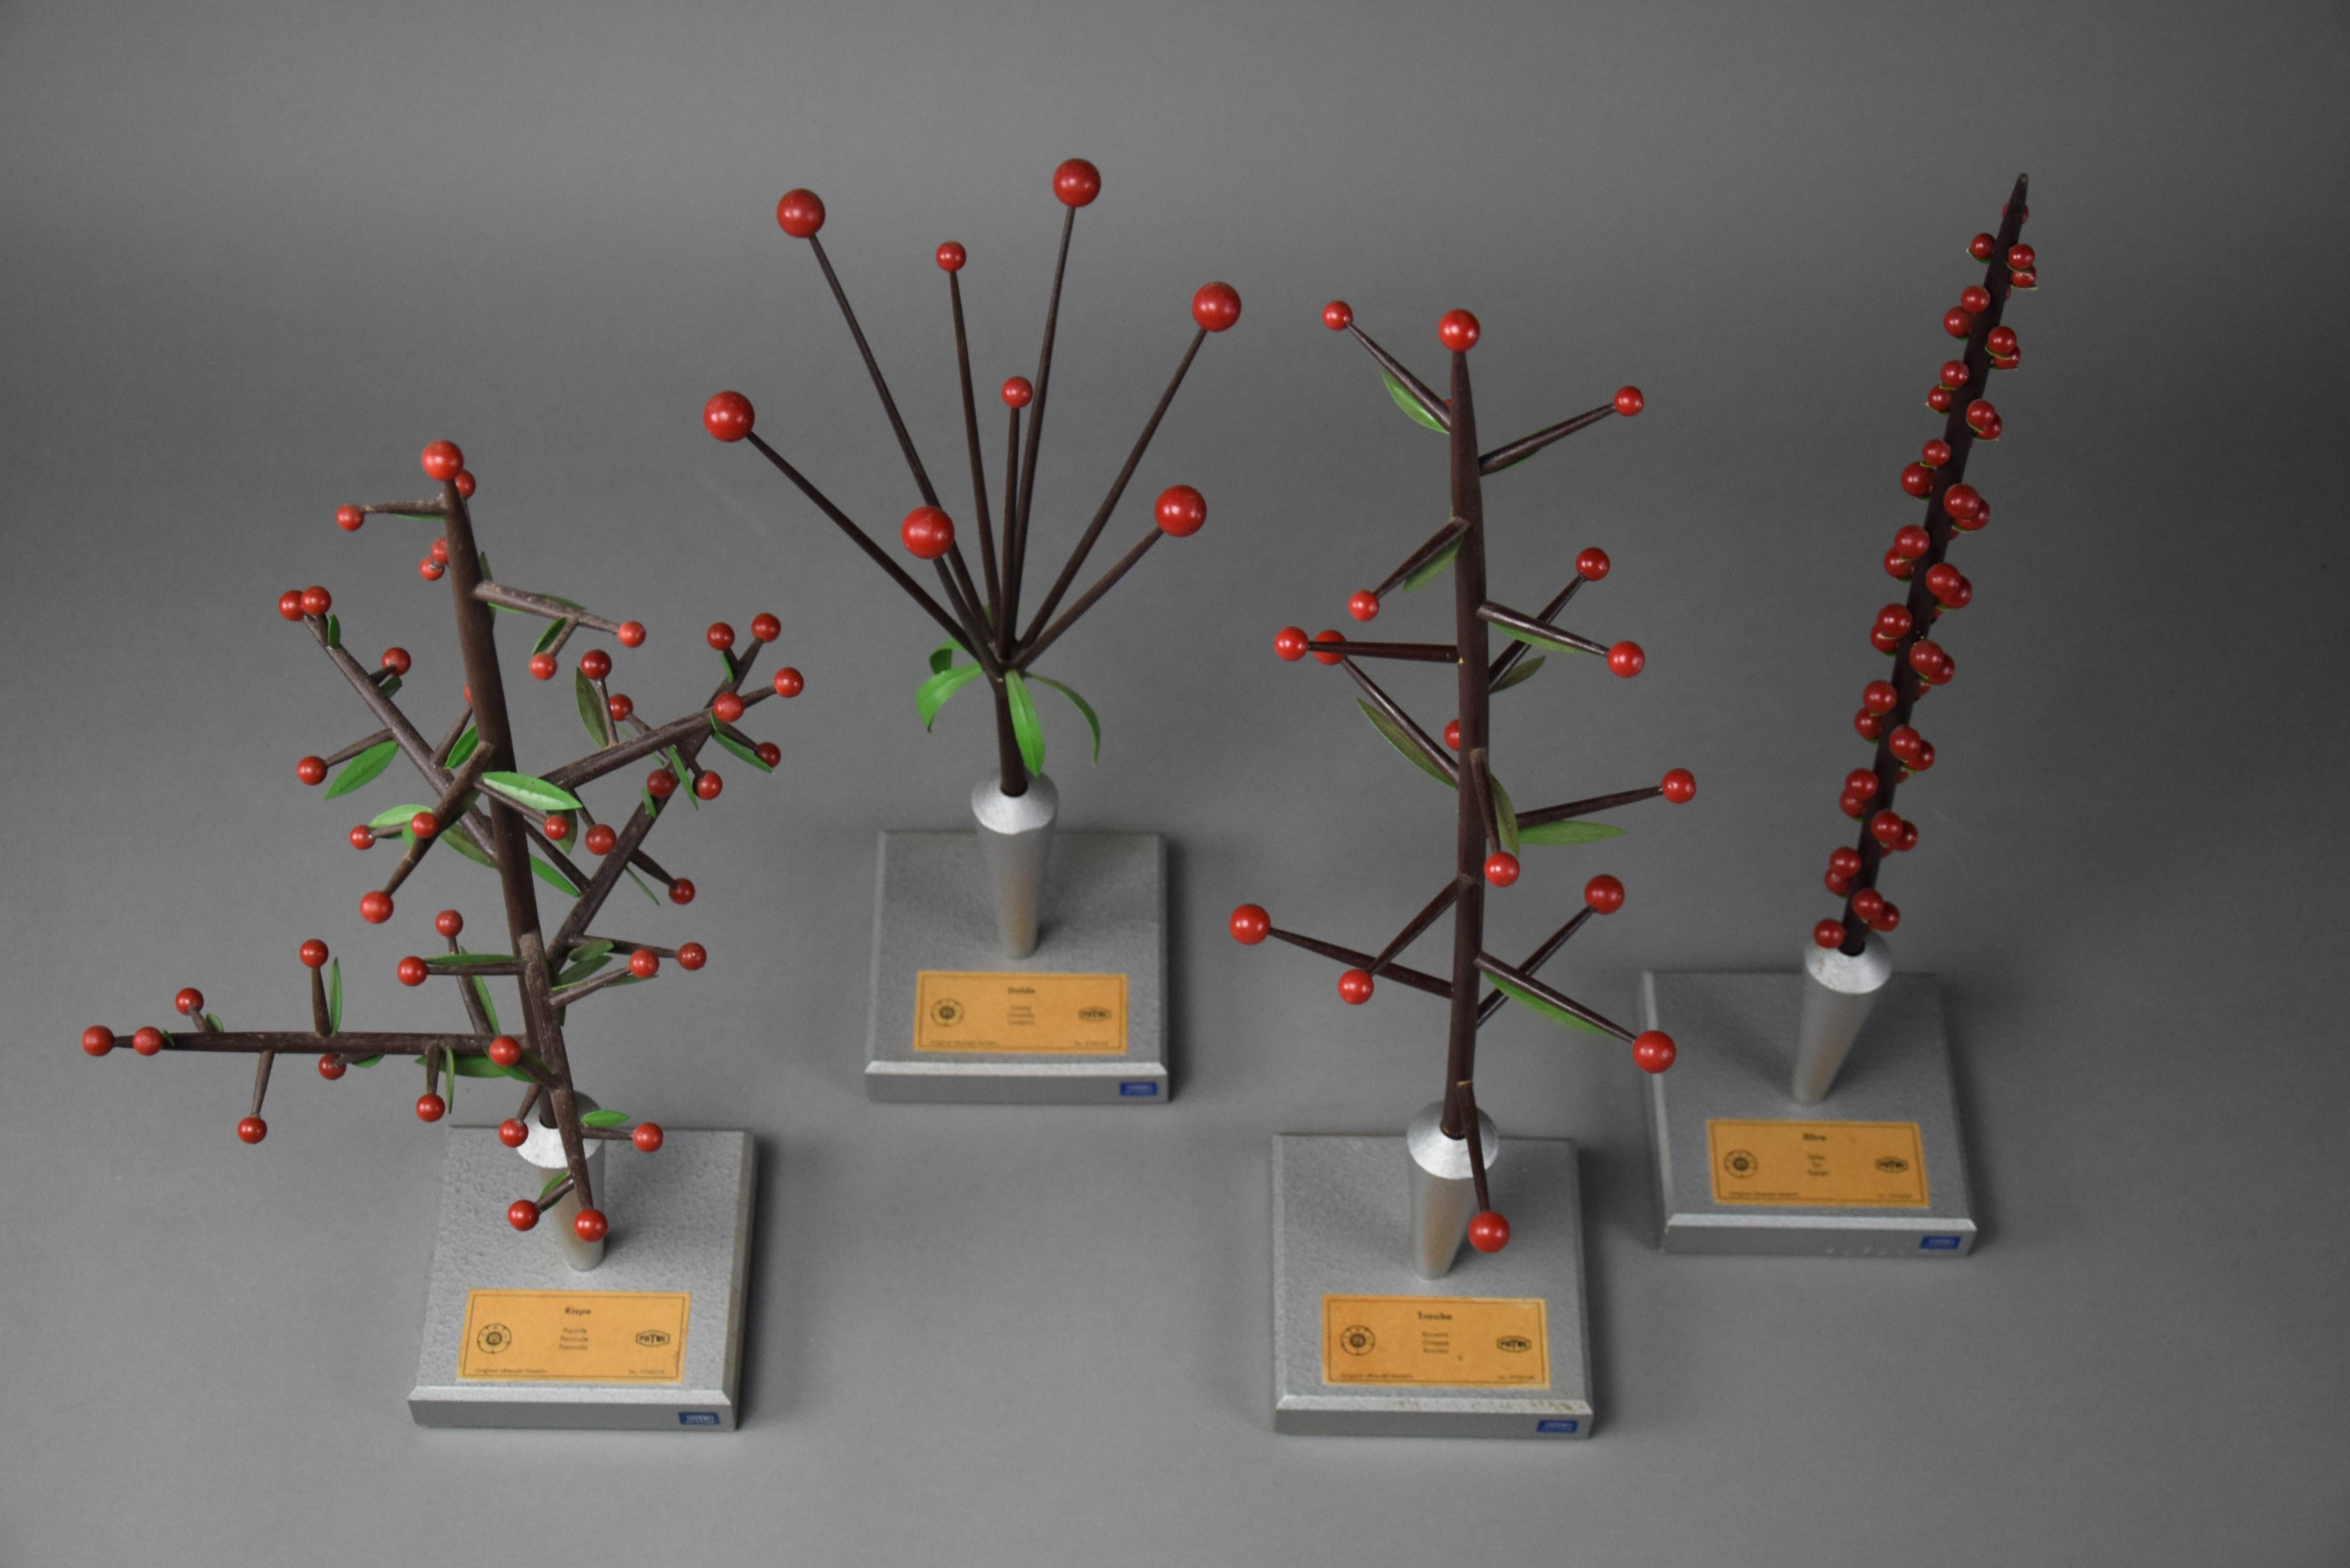 Discover Botany's Finest: Original Brendel Botanic Models from the 1950s

Unveil the beauty of botany with our exquisite collection of original Brendel botanic models: Spike, Raceme, Umbel, and Panicle. Produced in the 1950s by Phywe Science